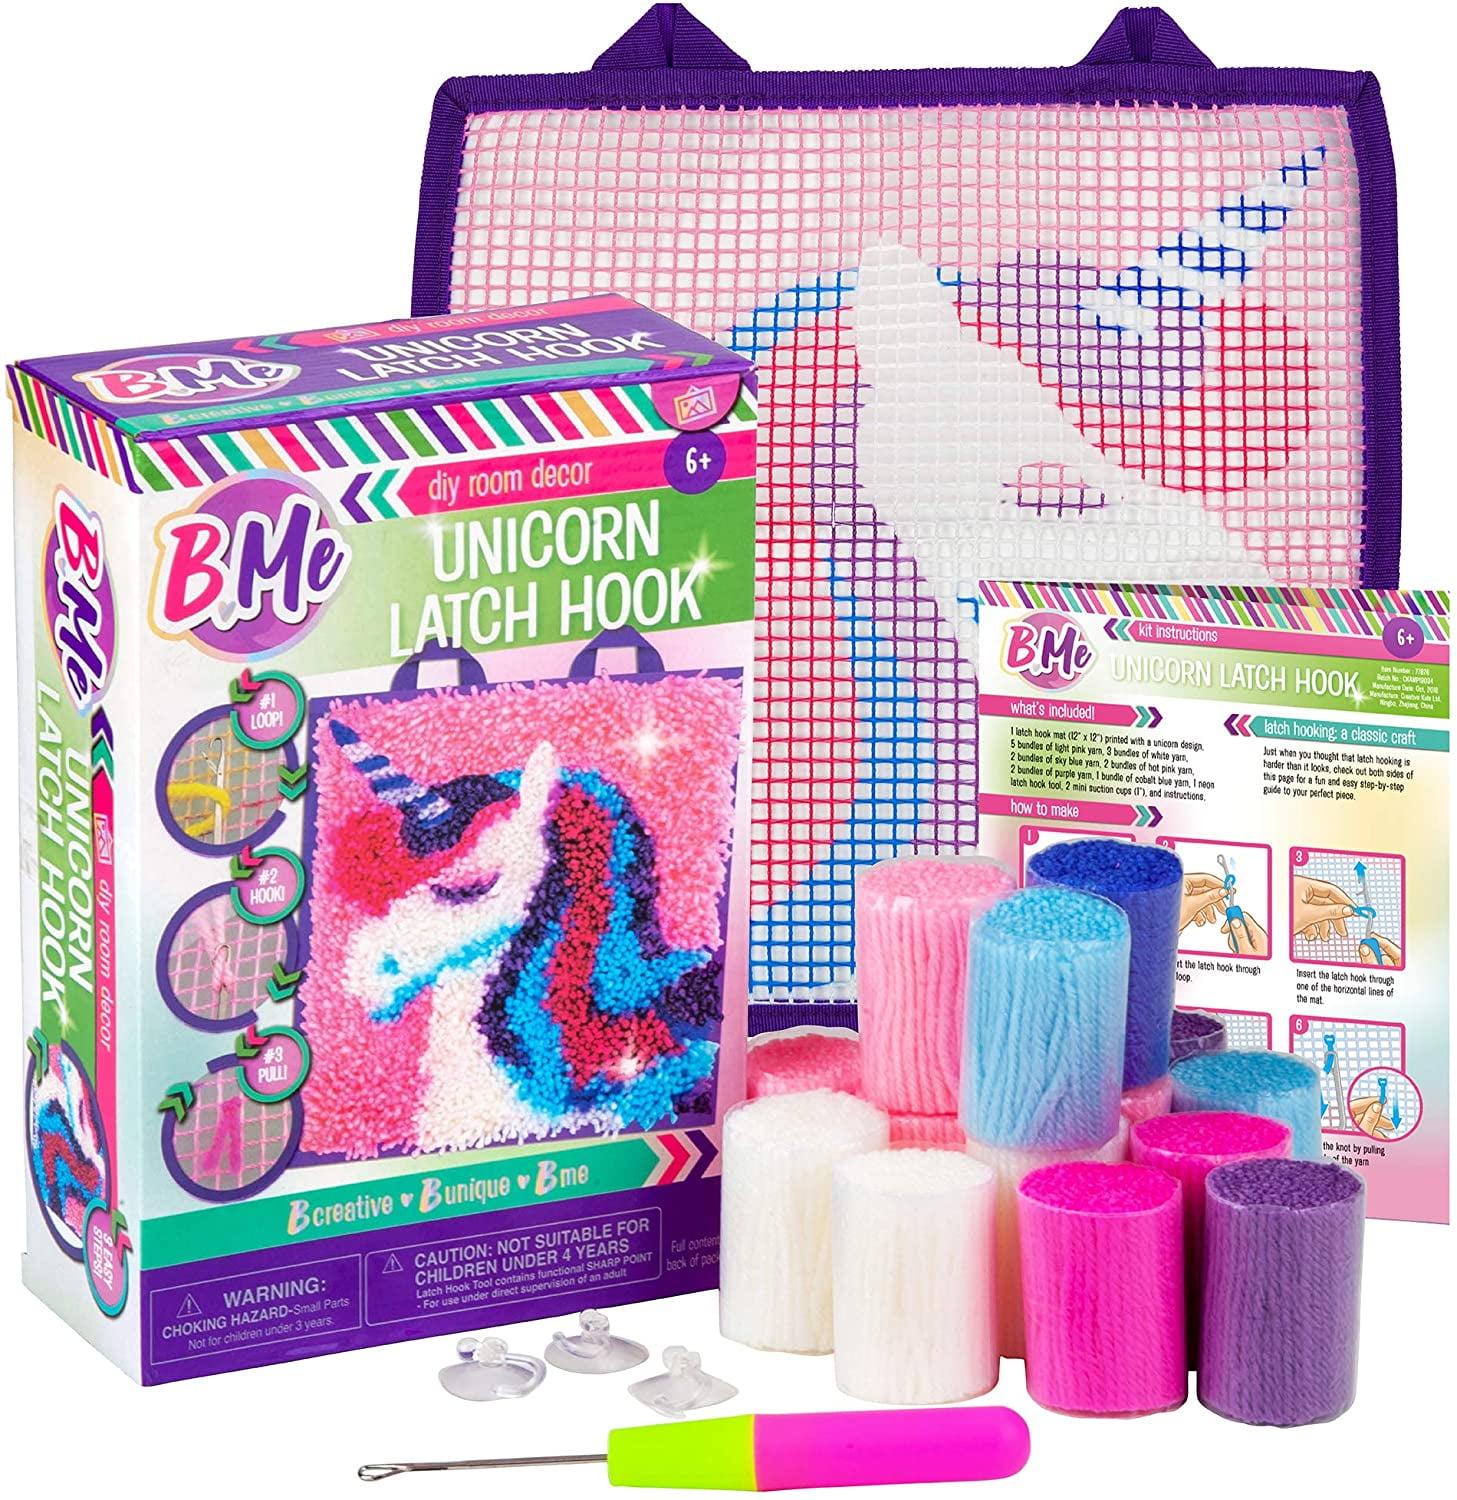 FunFlickers Kids Pottery Wheel Kit - Battery Operated Pottery Wheel &  Painting Kit - Kids Pottery Wheel Kit - Battery Operated Pottery Wheel &  Painting Kit . shop for FunFlickers products in India.